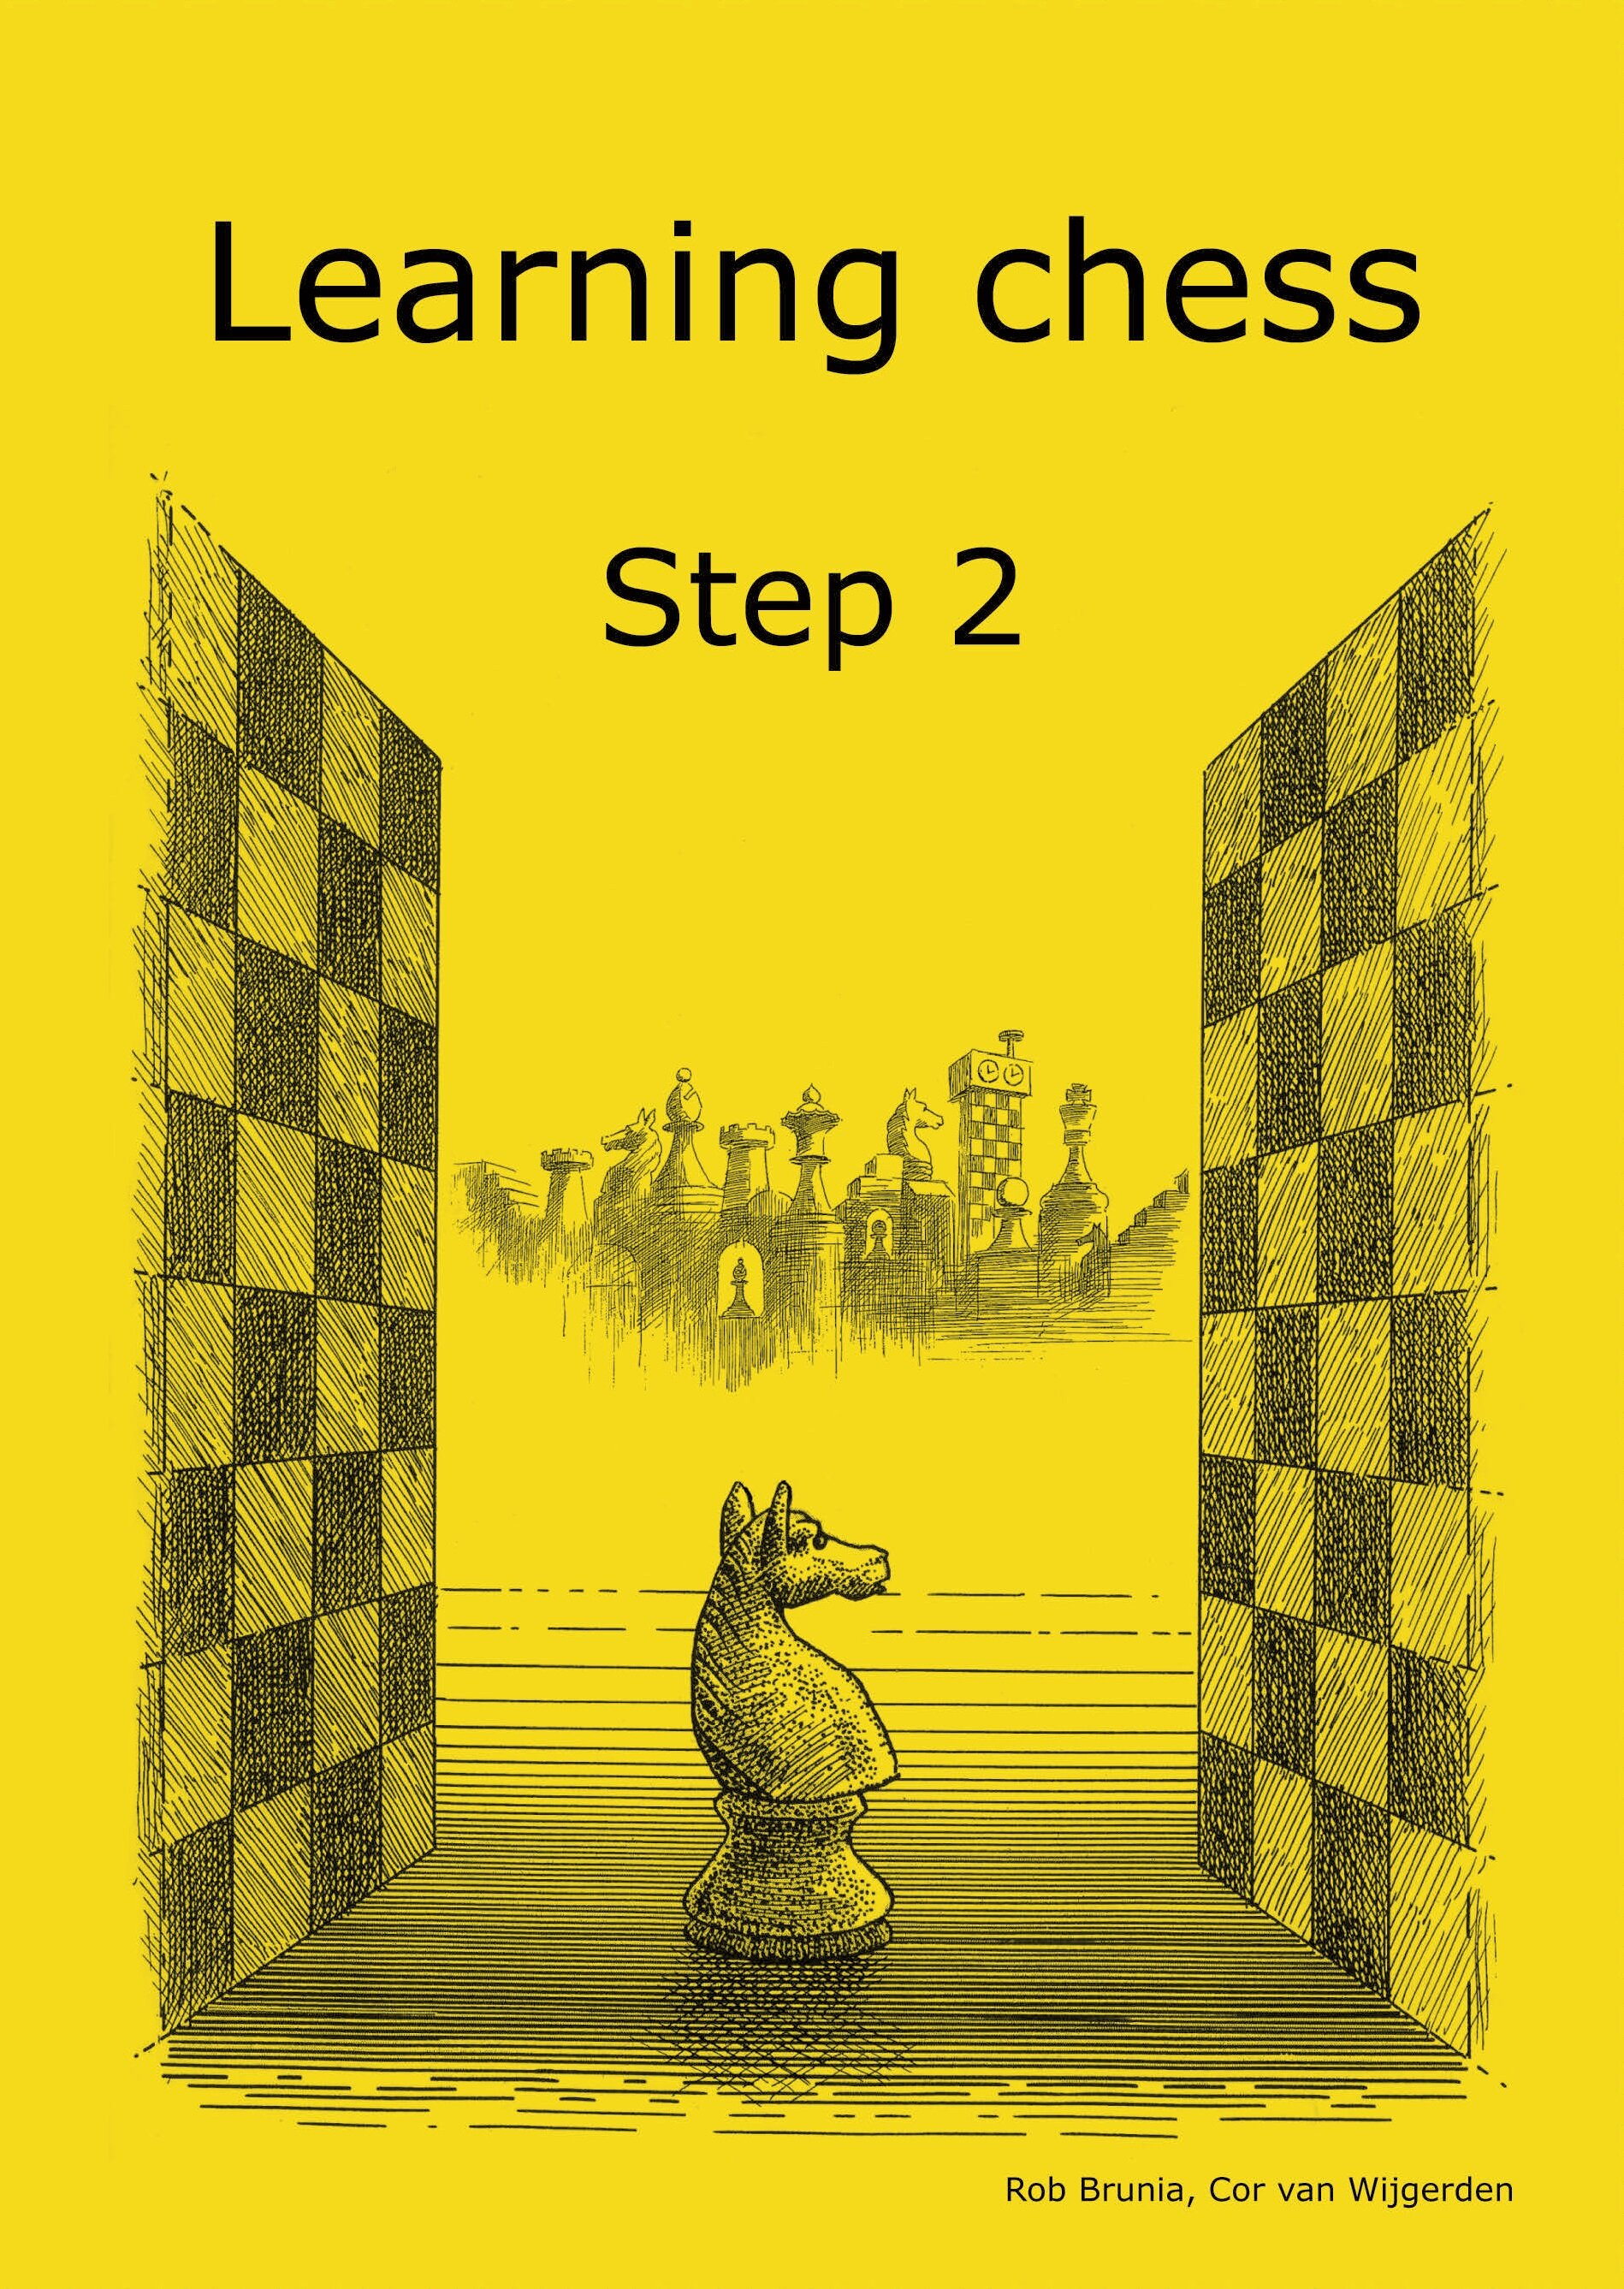 Thinking ahead. Степ чес. STEPCHESS задачи. Brunia r., van Wijgerden c. Learning Chess. Step 1. Extra. Step by Step 2 book.